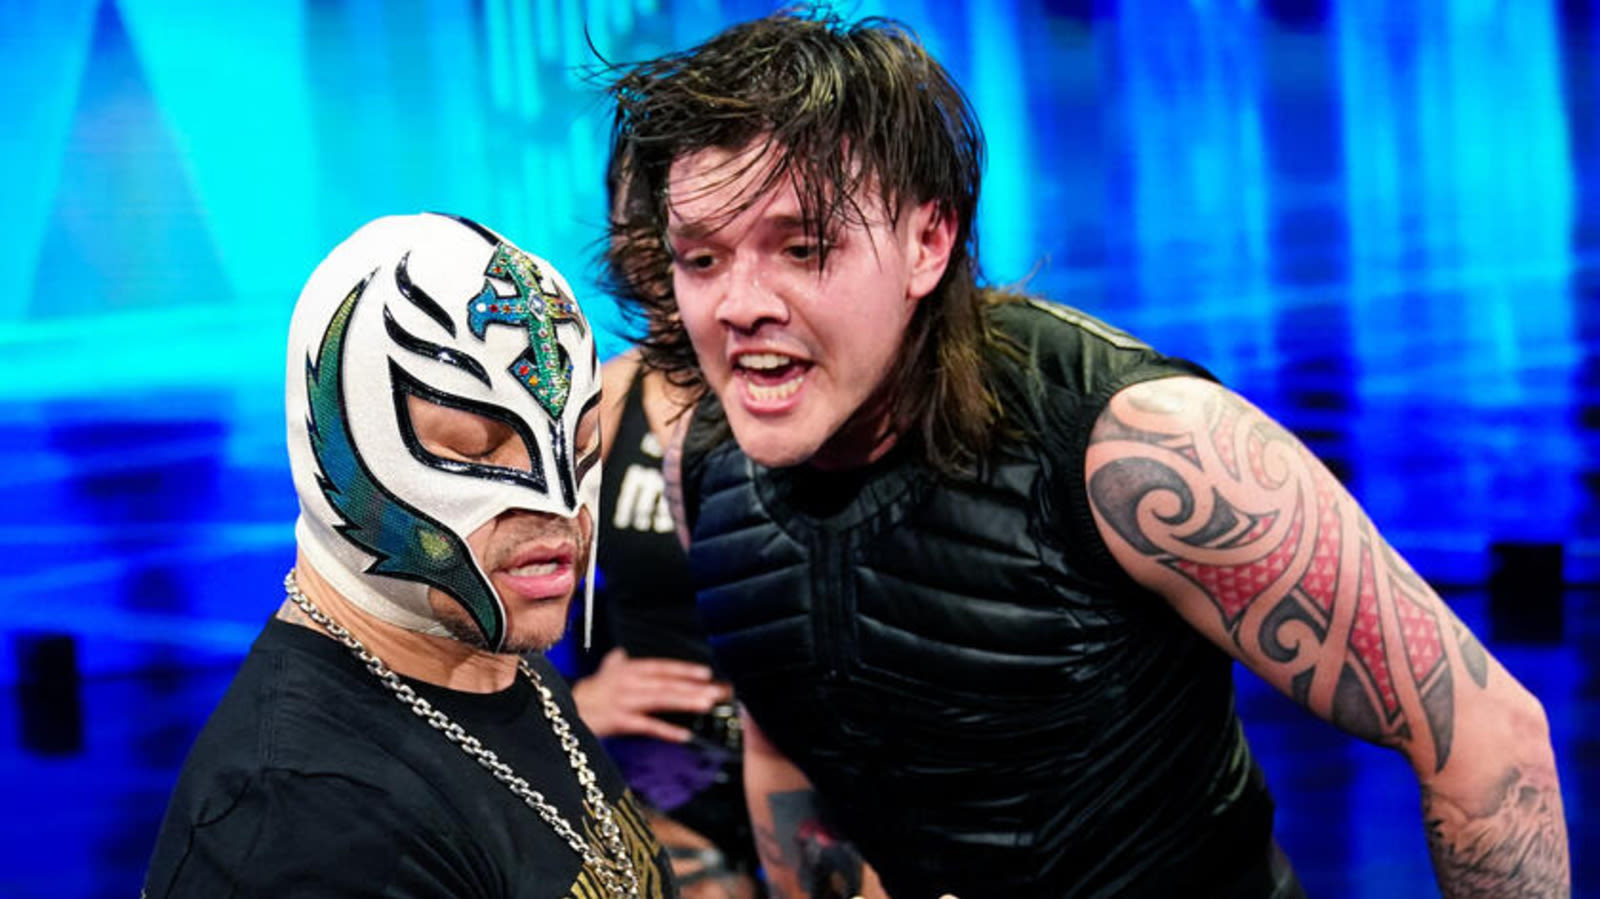 Rey Mysterio Discusses His Son Dominik's WWE Heel Turn, Being Proud As A Father - Wrestling Inc.